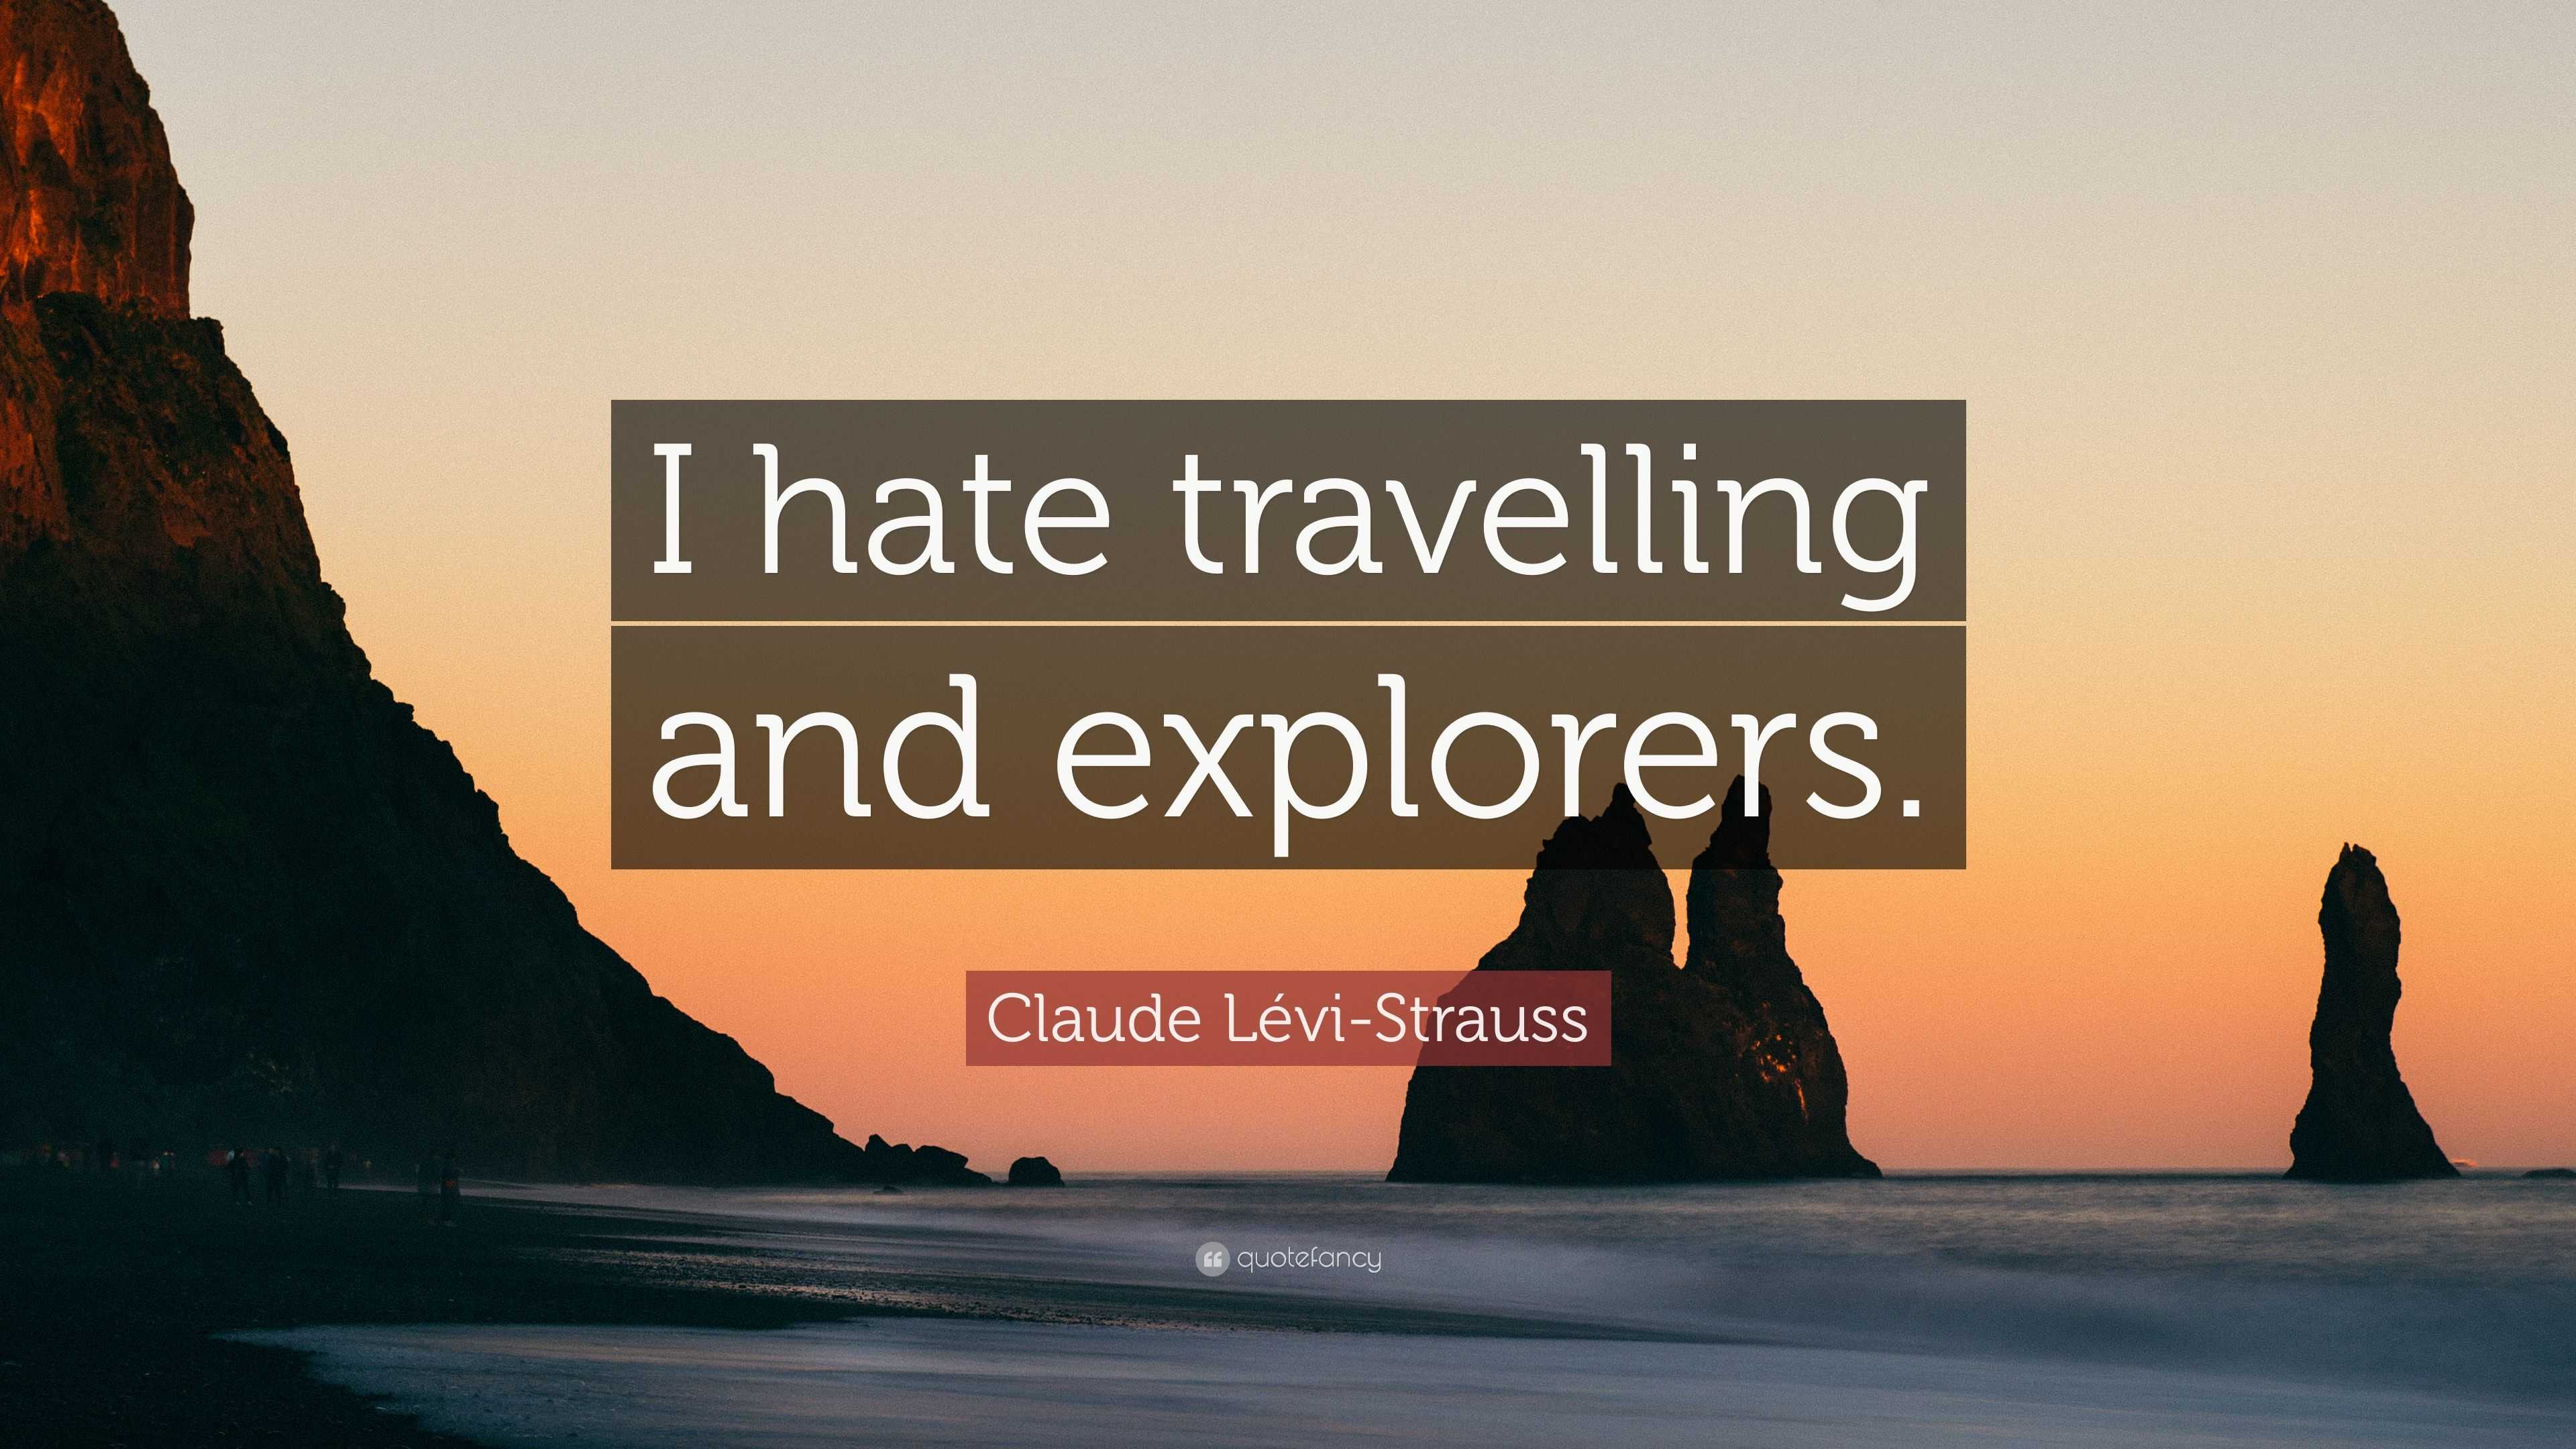 i hate travelling by boat because